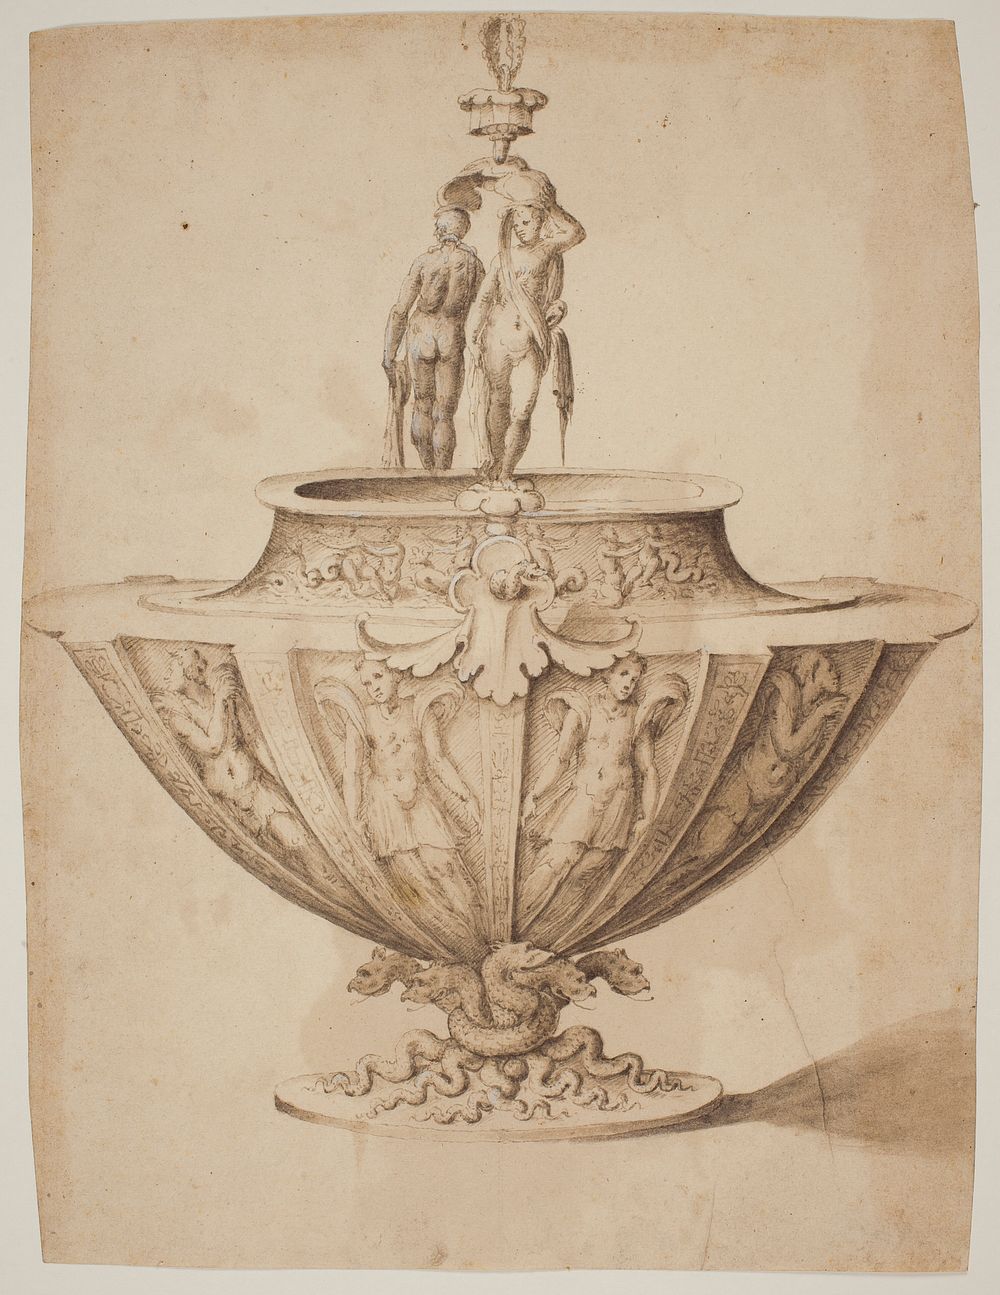 A magnificent bowl with figures and marine scenes on a base encircled by snakes by Giulio Romano